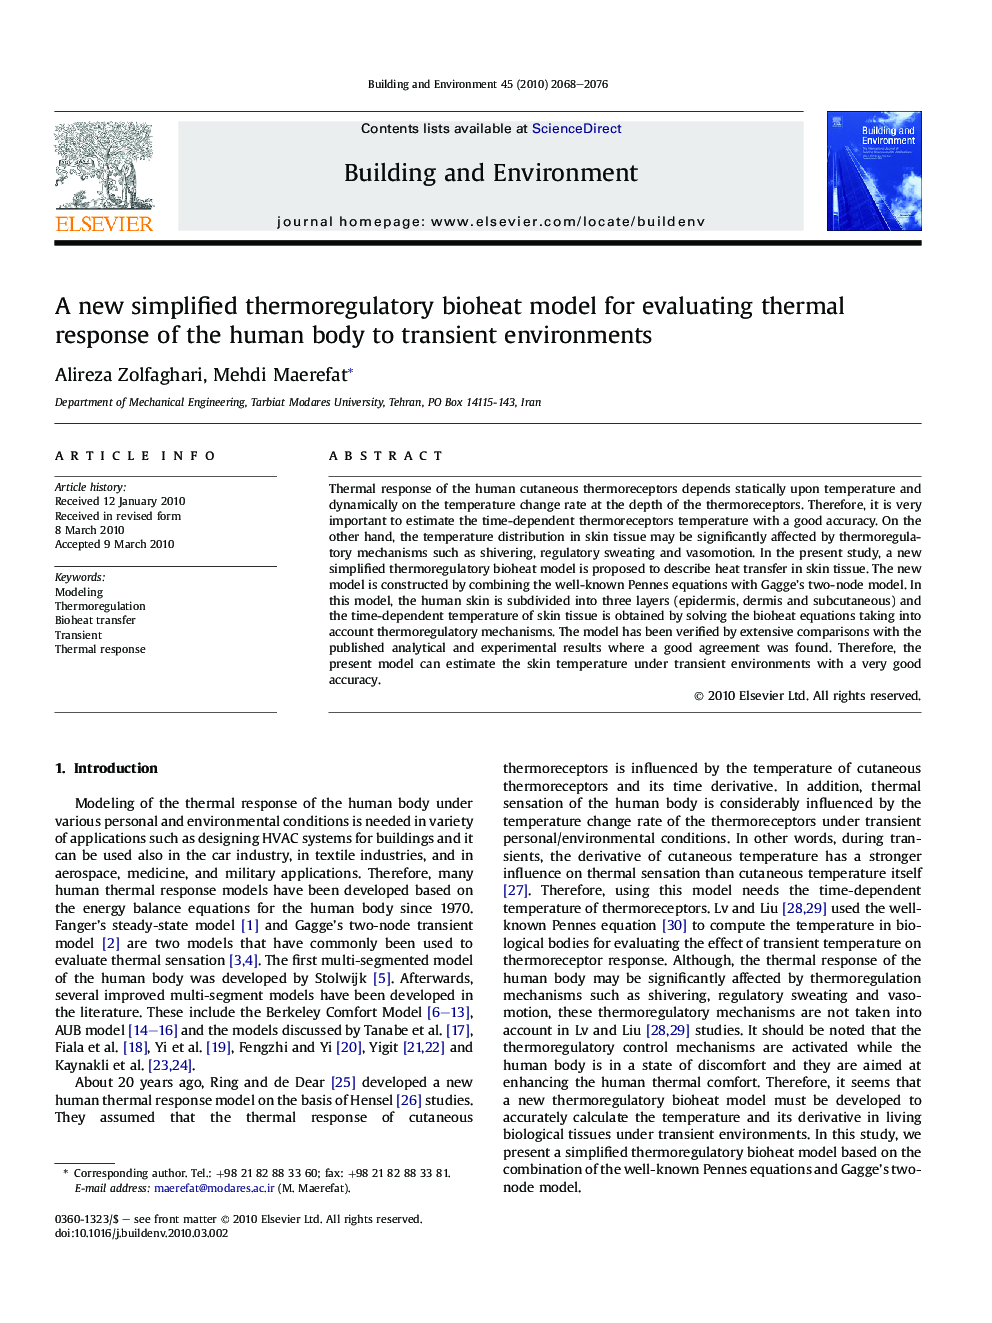 A new simplified thermoregulatory bioheat model for evaluating thermal response of the human body to transient environments